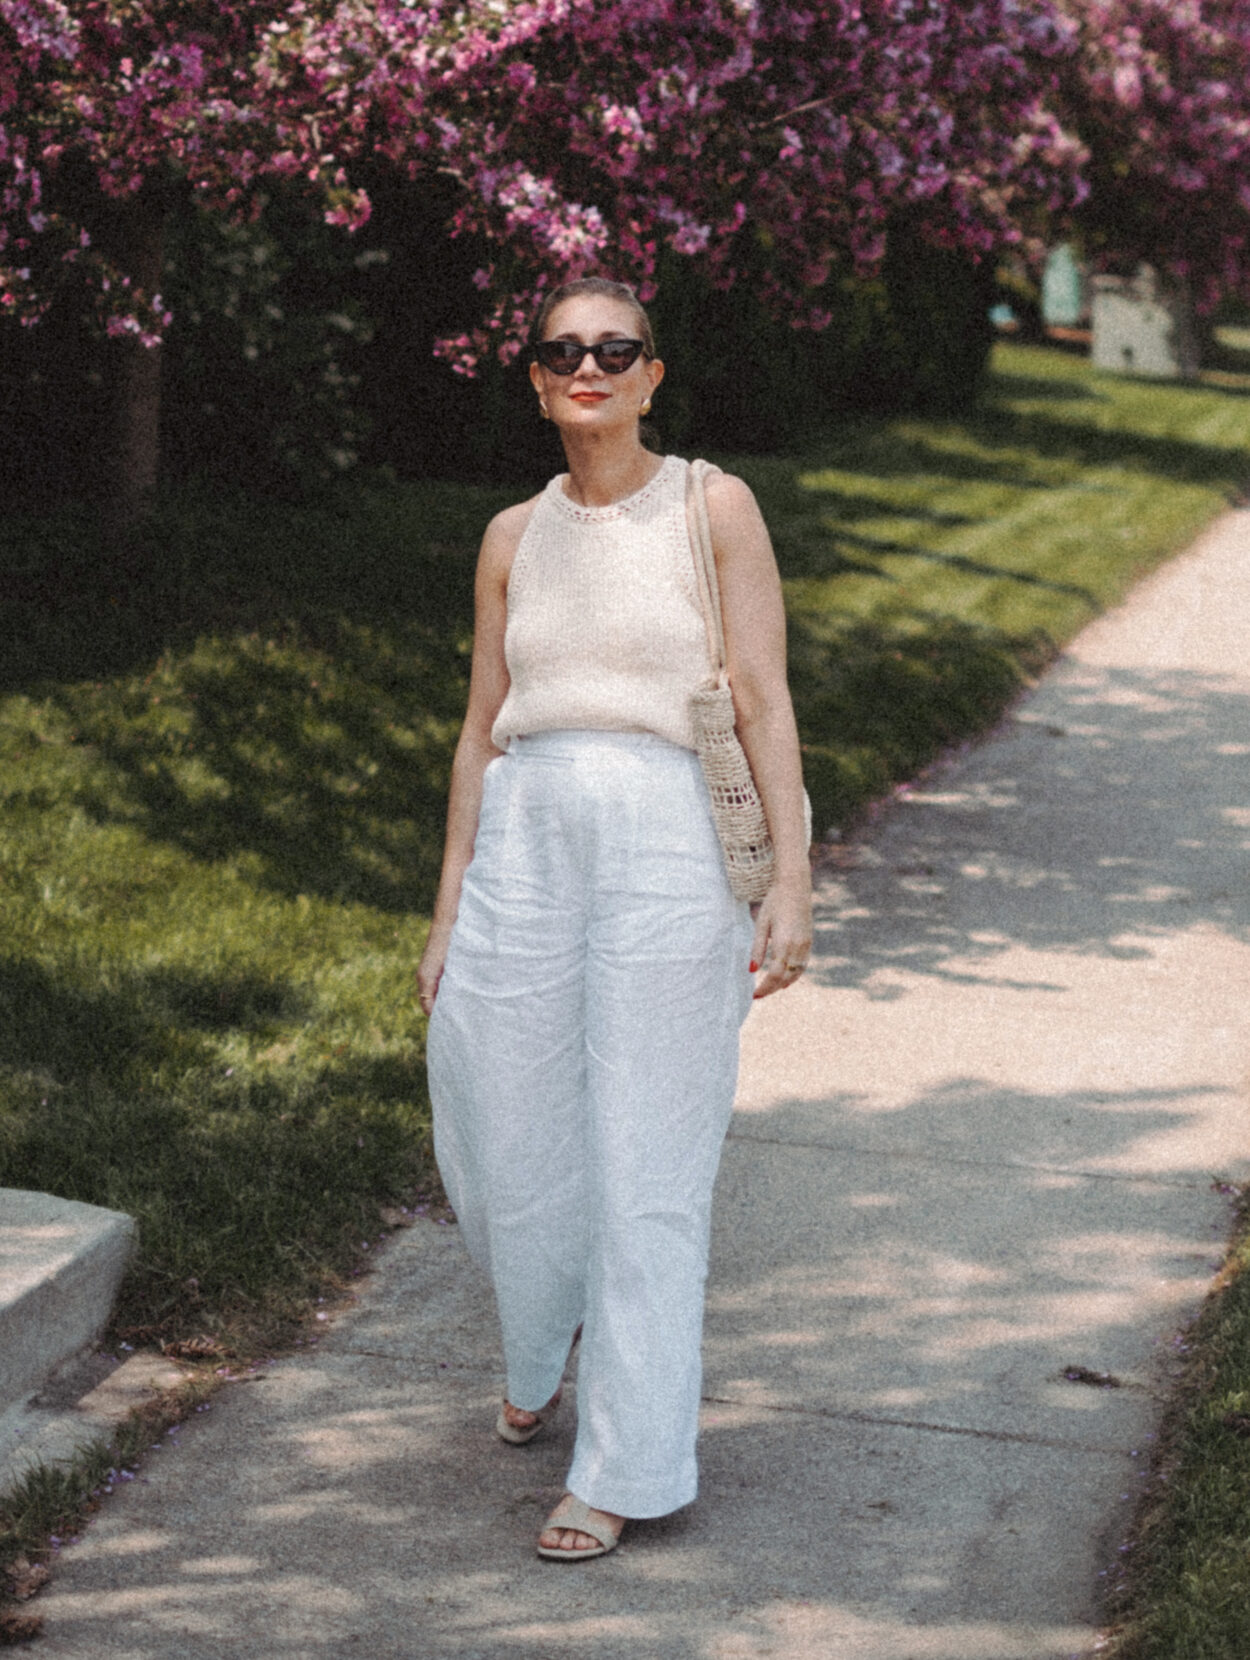 Karin Emily wears a cream sweater tank and white linen pair of pants while walking in front of a row of lilac bushes